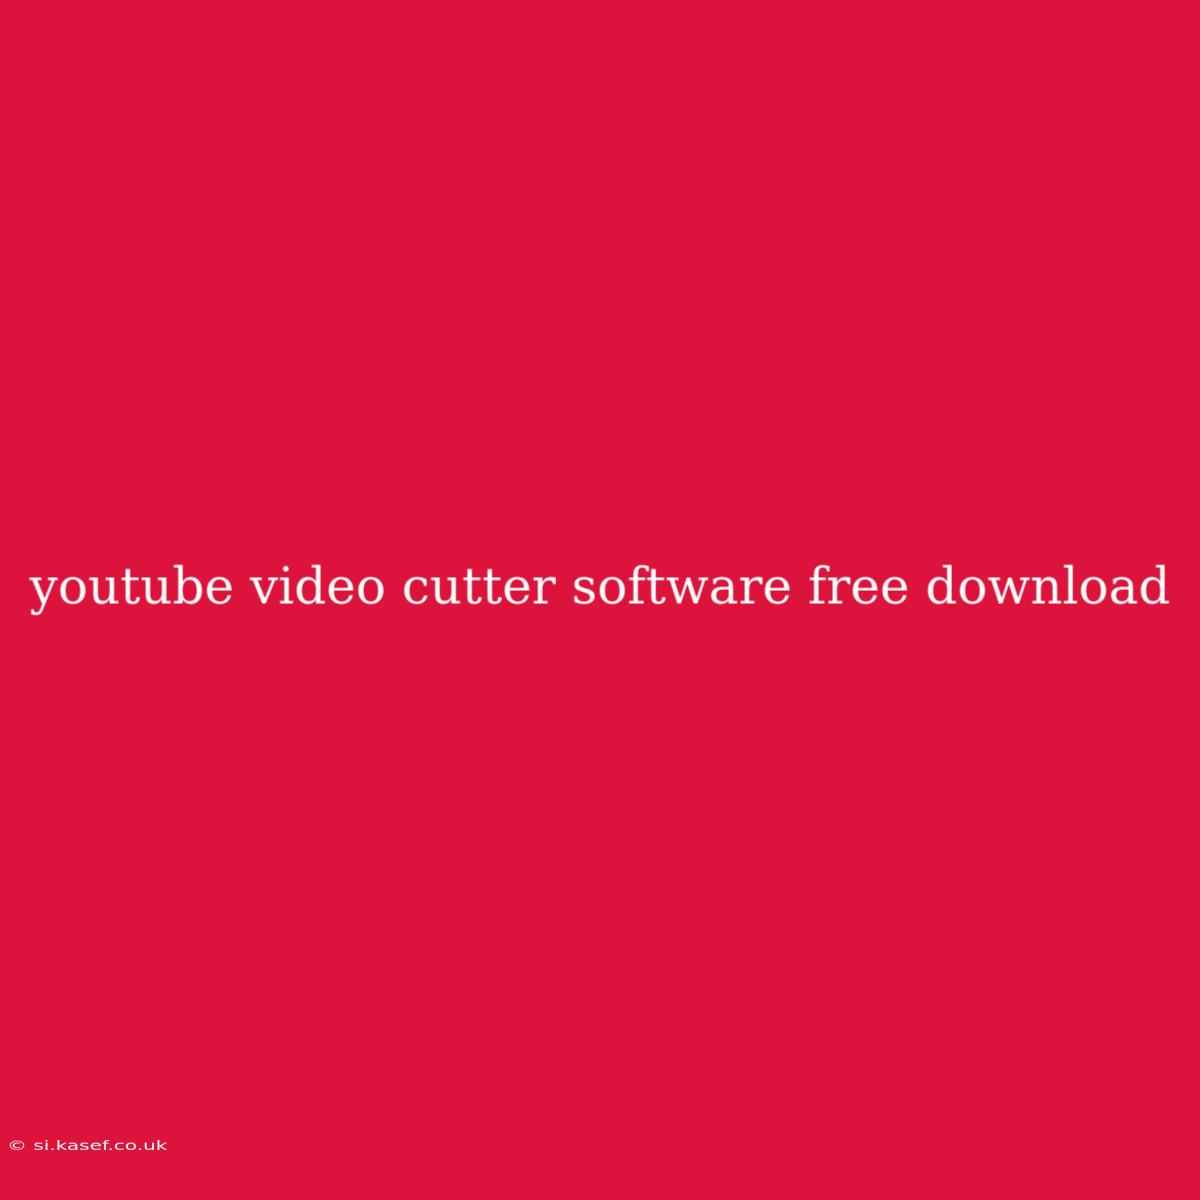 Youtube Video Cutter Software Free Download